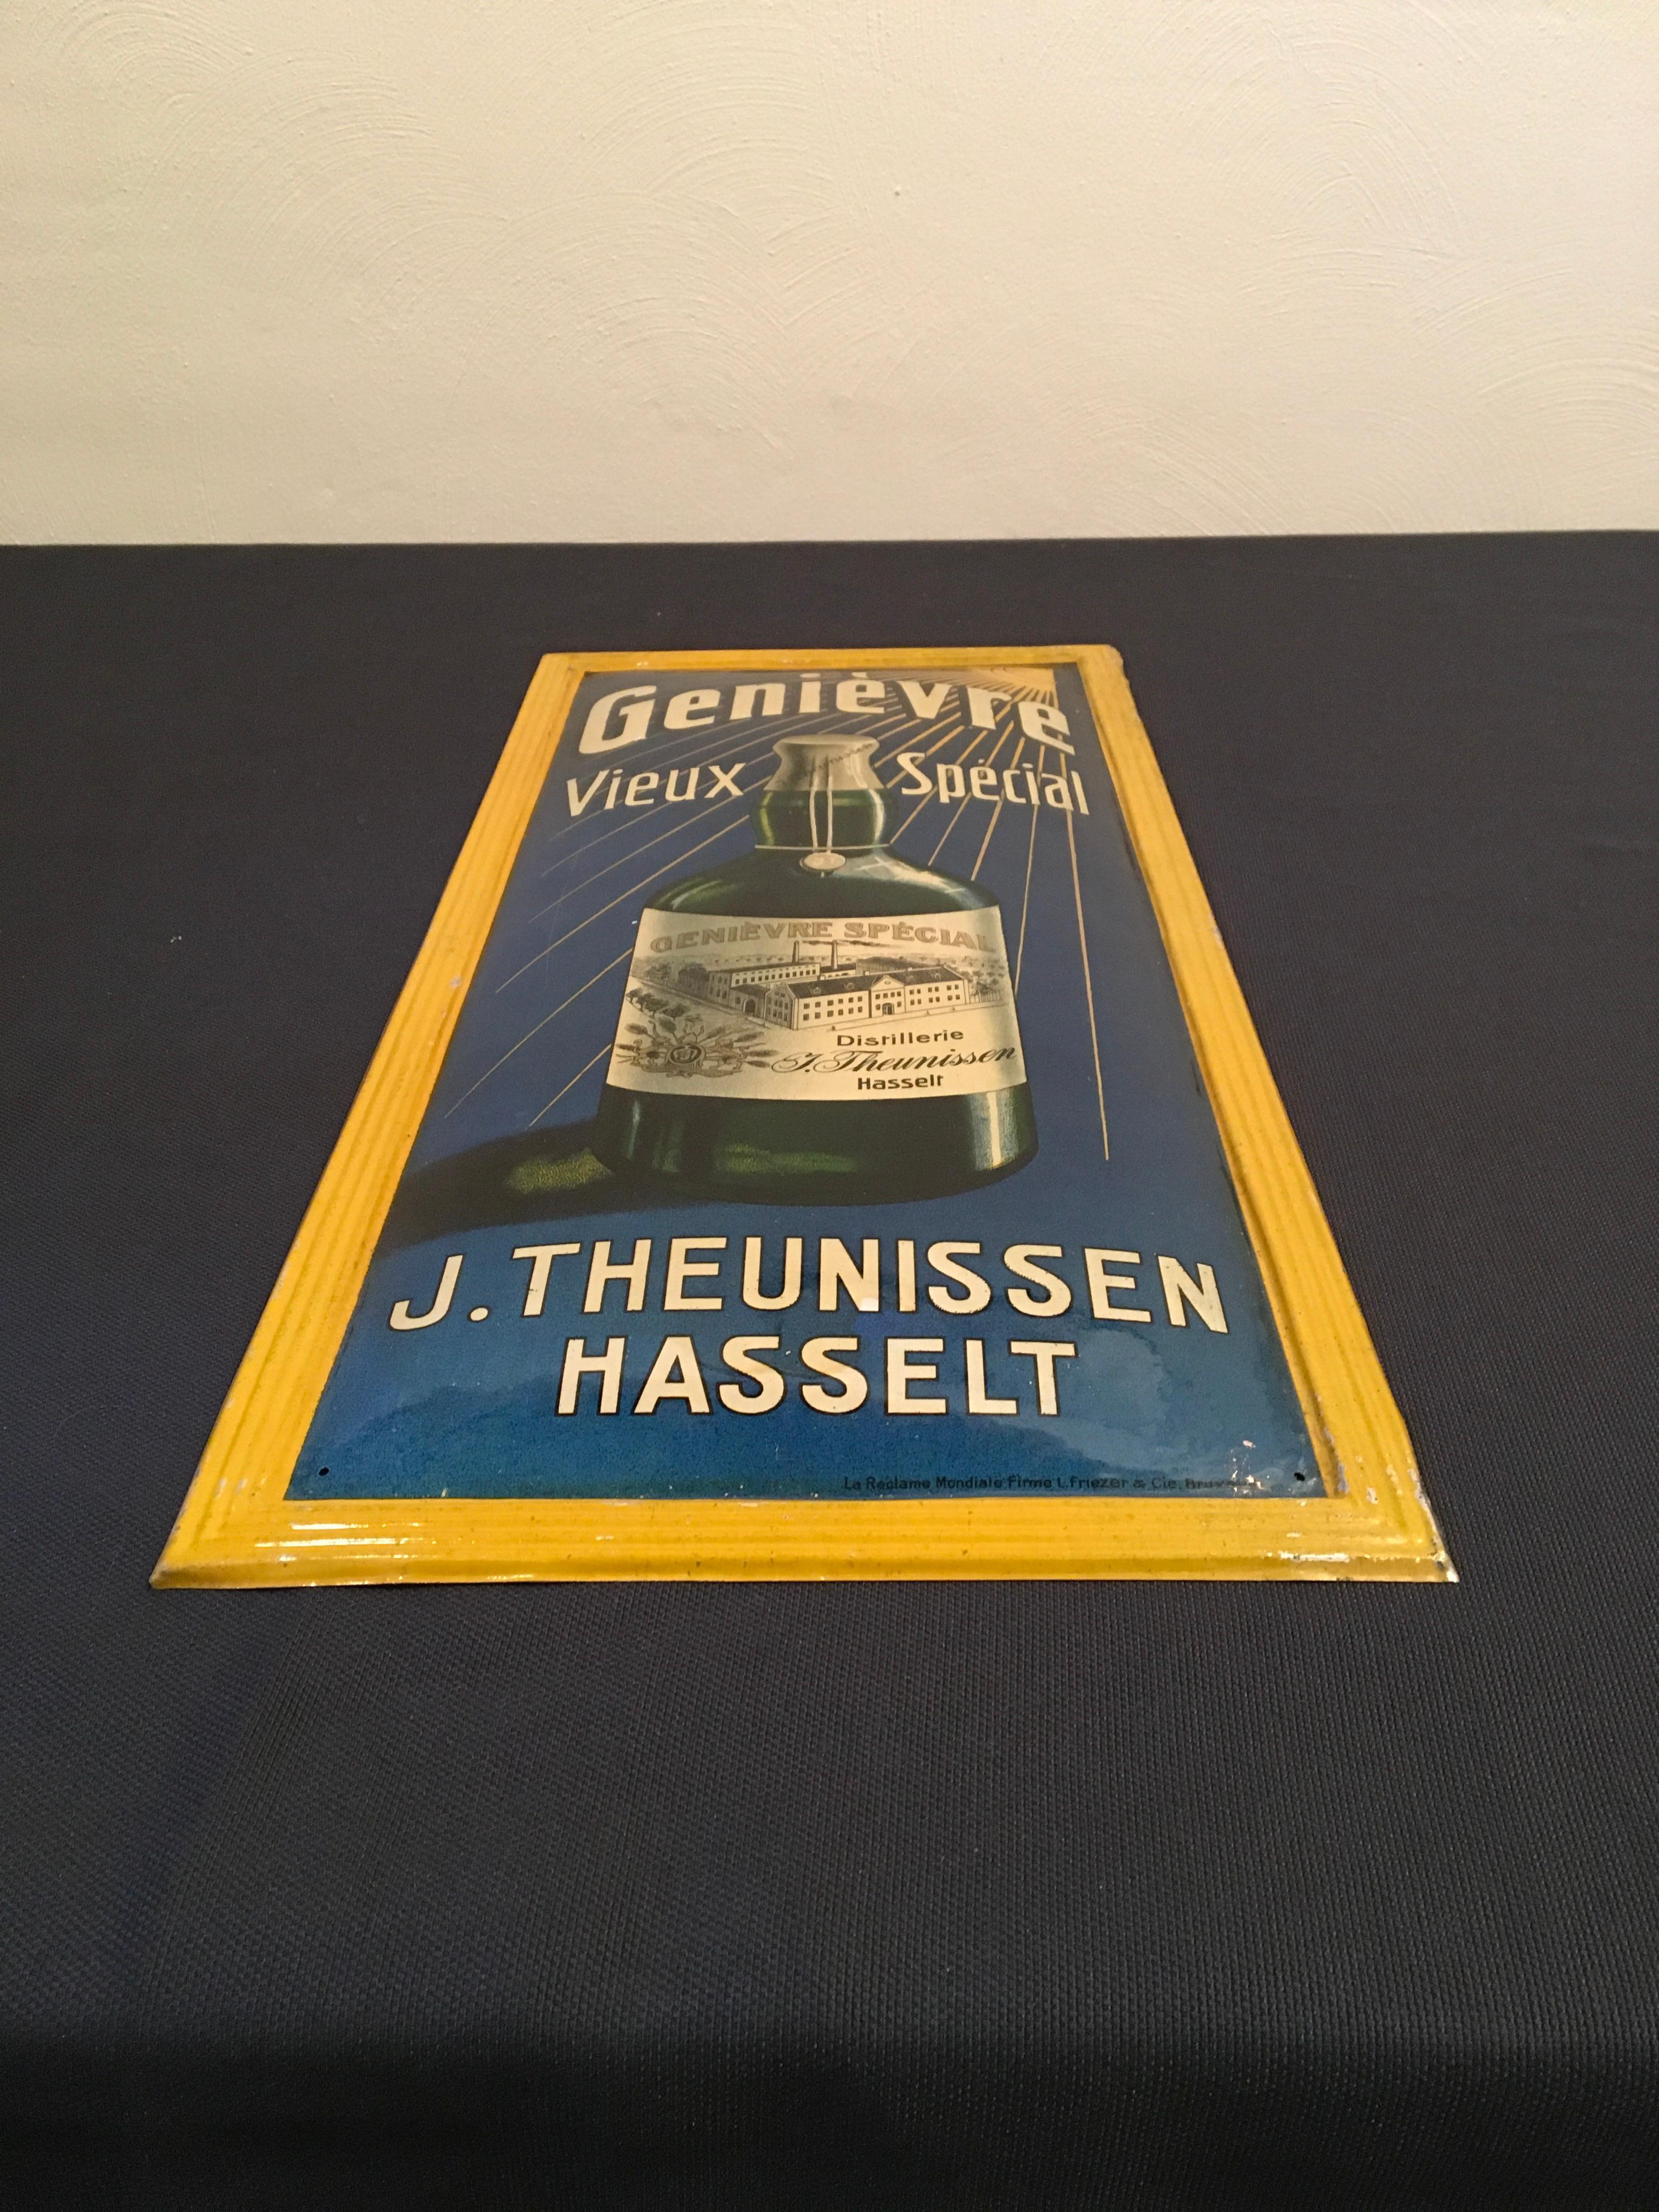 1920s Belgian Jenever Sign. 
Antique sign - Art Deco sign for Jenever Made in Belgium:  
J. Theunissen - Vieux Spécial - Hasselt - Belgium.
A lithographic tin sign from the 1920s signed La Reclame Mondiale Firme L. Friezer & Cie. Bruxelles